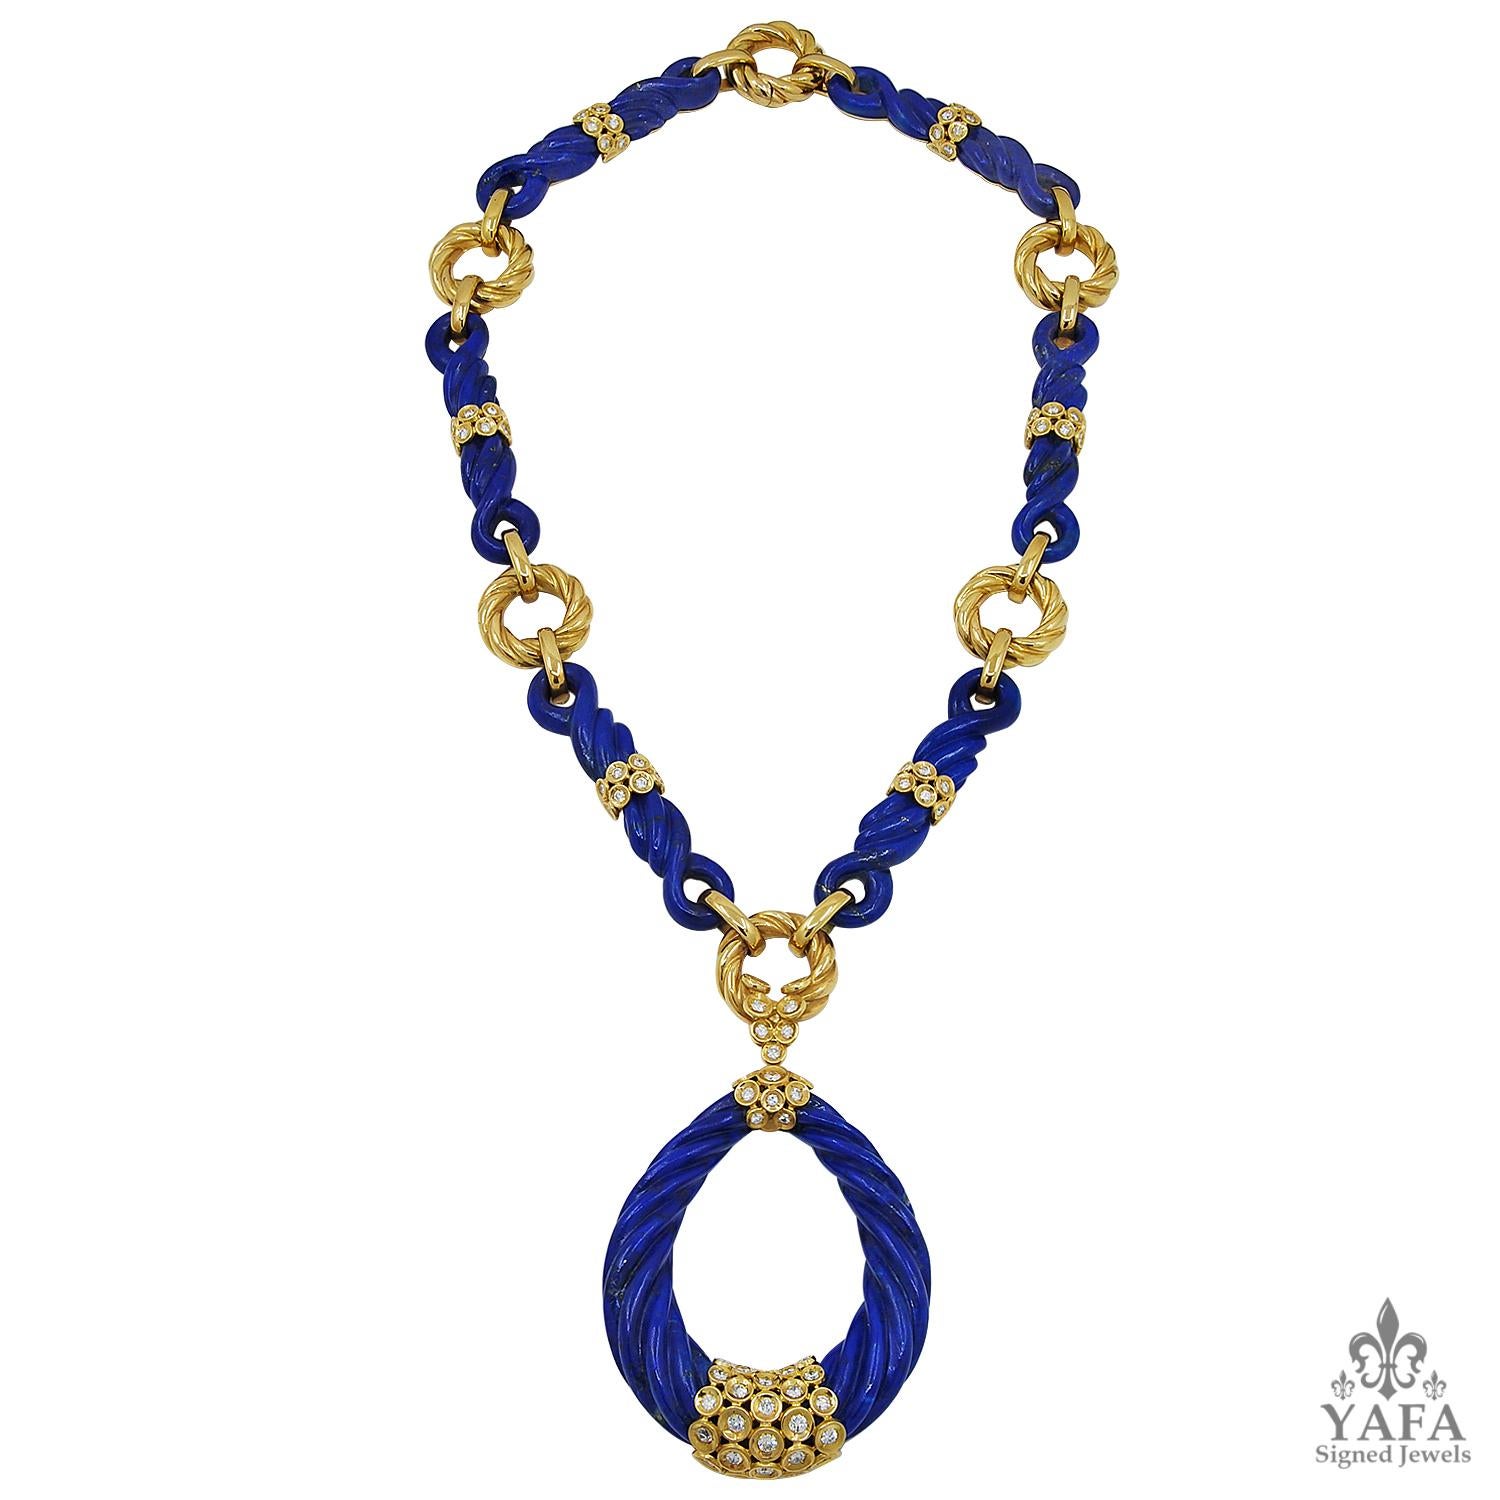 Van Cleef & Arpels Vintage 1970s Diamond Lapis Lazuli Pendant-Necklace Elizabeth Taylor Style
An 18k yellow gold pear shaped twisted lapis lazuli pendant necklace decorated with circular gold accents set with diamonds.
dimensions – necklace approx.